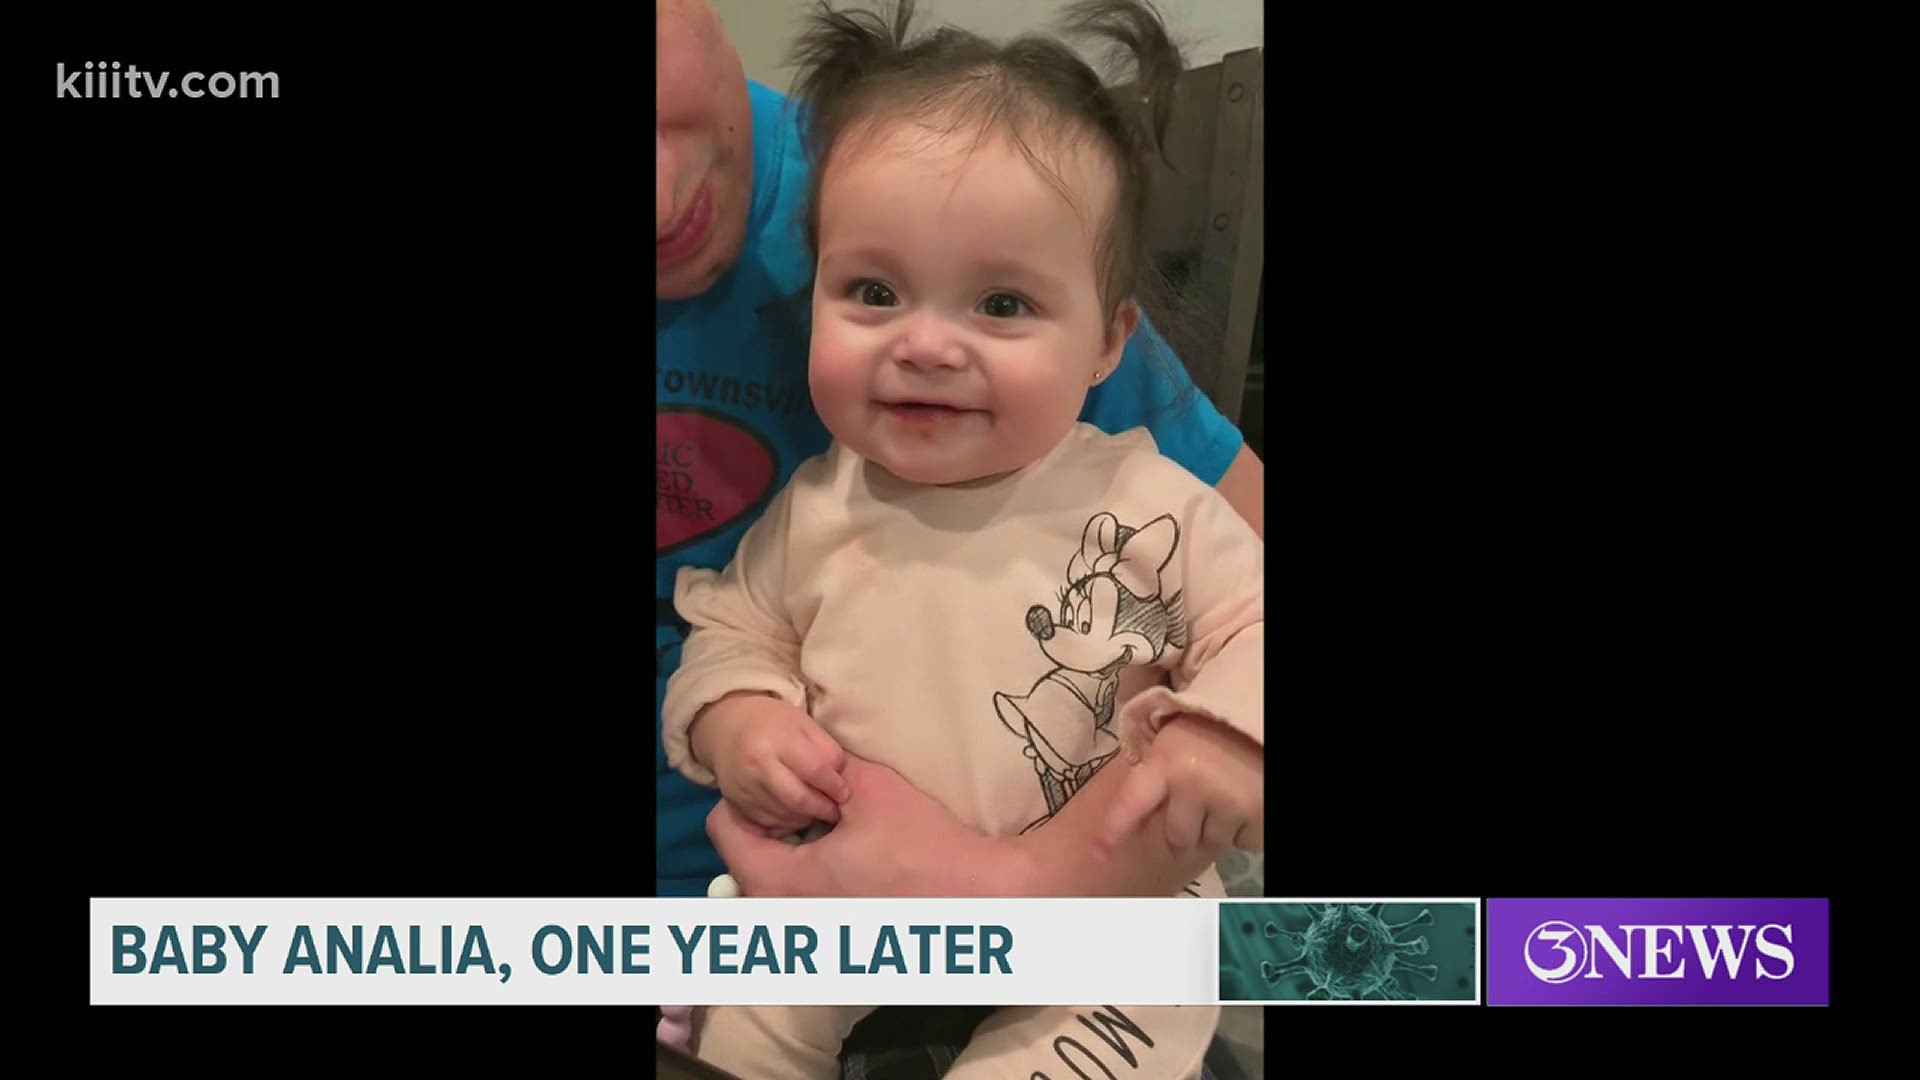 Last year, we introduced you to baby Analia and the challenges new moms faced right at the start of this pandemic. Today, Analia is one-year-old.